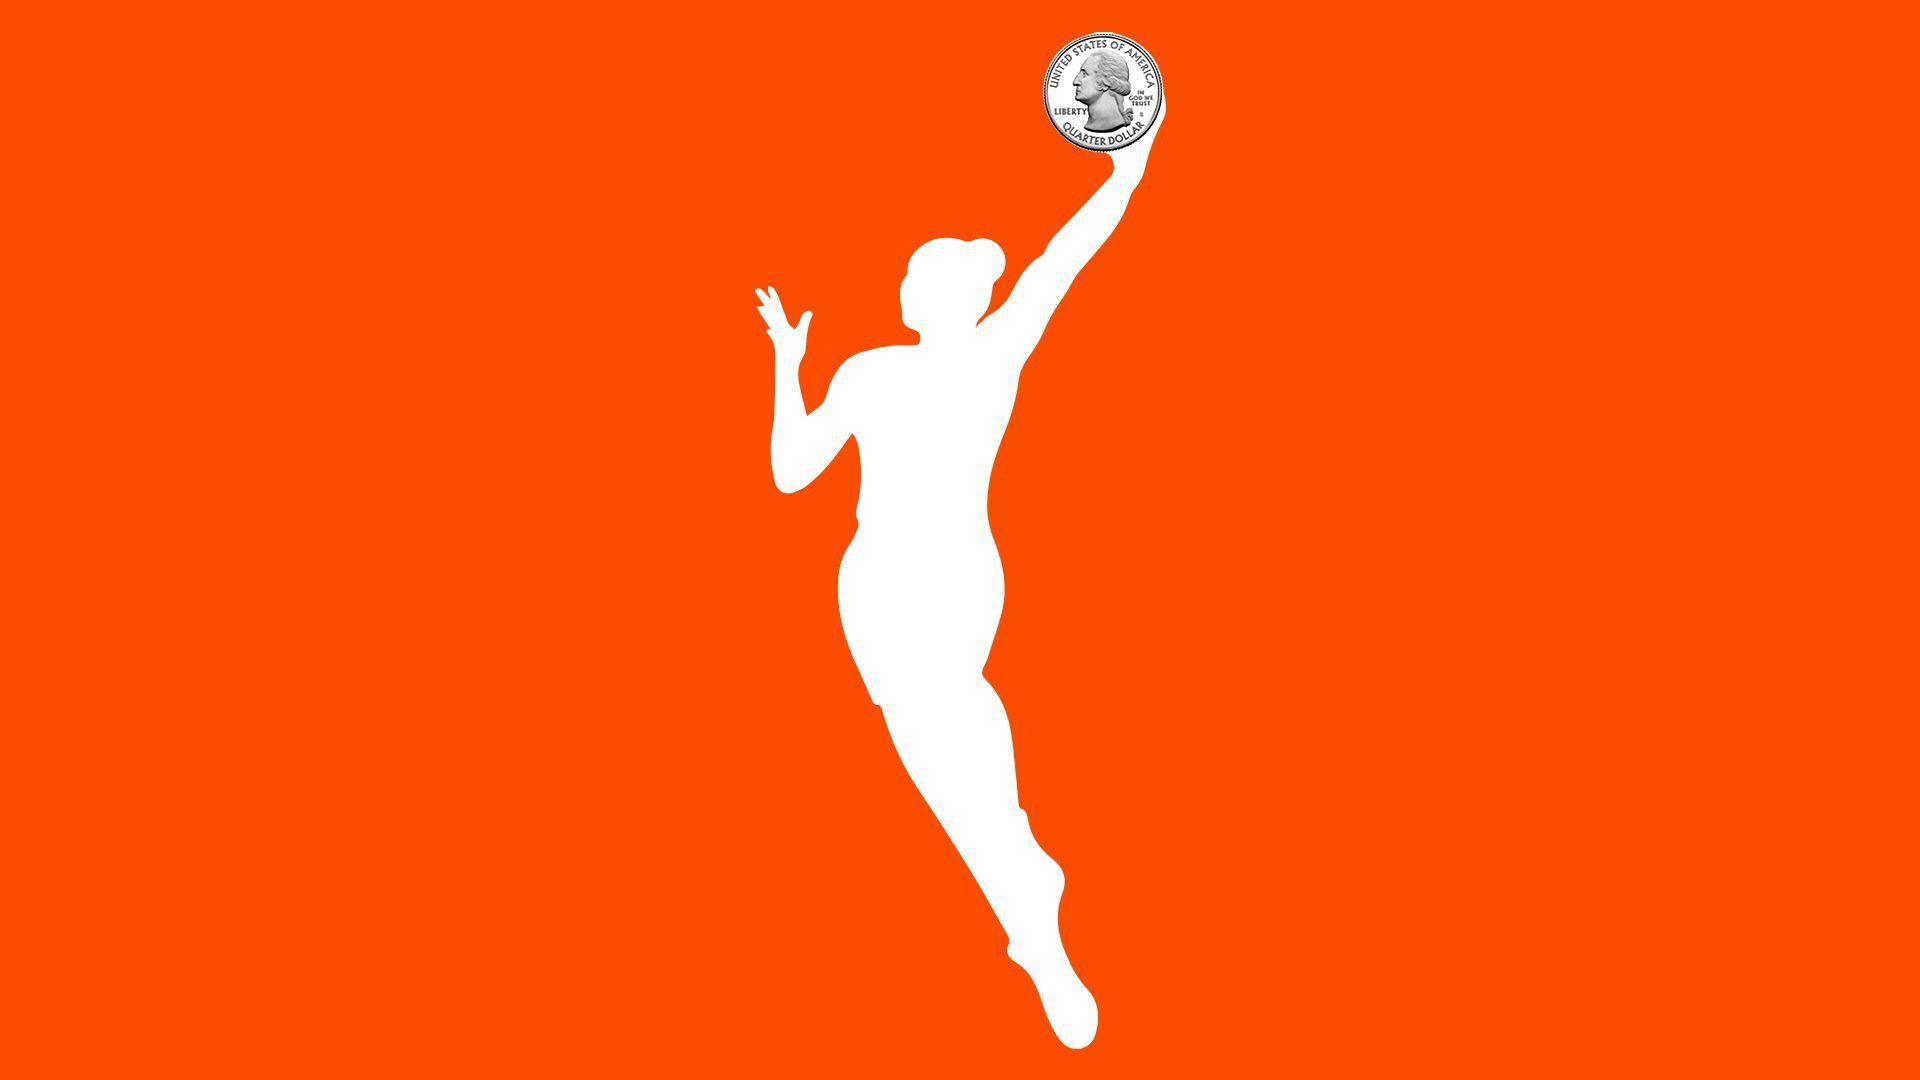 Illustration of female basketball player holding a coin like a basketball